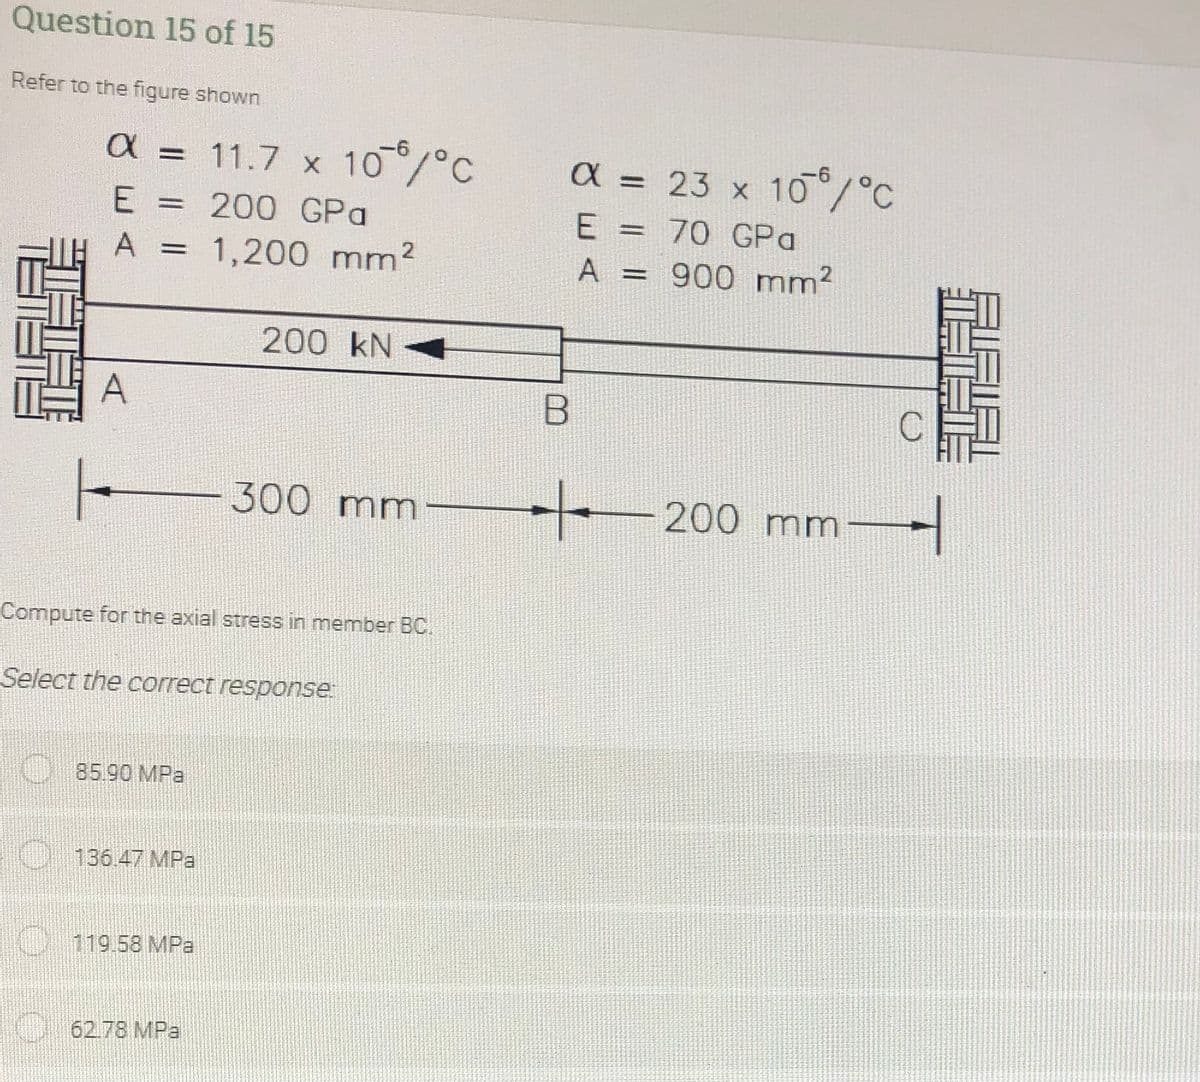 Question 15 of 15
Refer to the figure shown
a = 11.7 x 10/°C
9-
a = 23 x 10°/°C
E
= 200 GPa
70 GPa
%3D
A =
1,200 mm2
A = 900 mm?
%3D
200 kN 4
A
300
mm
200 mm
Compute for the axial stress in member BC.
Select the correct response.
85.90 MPa
O 136.47 MPa
119.58 MPa
62.78 MPa
